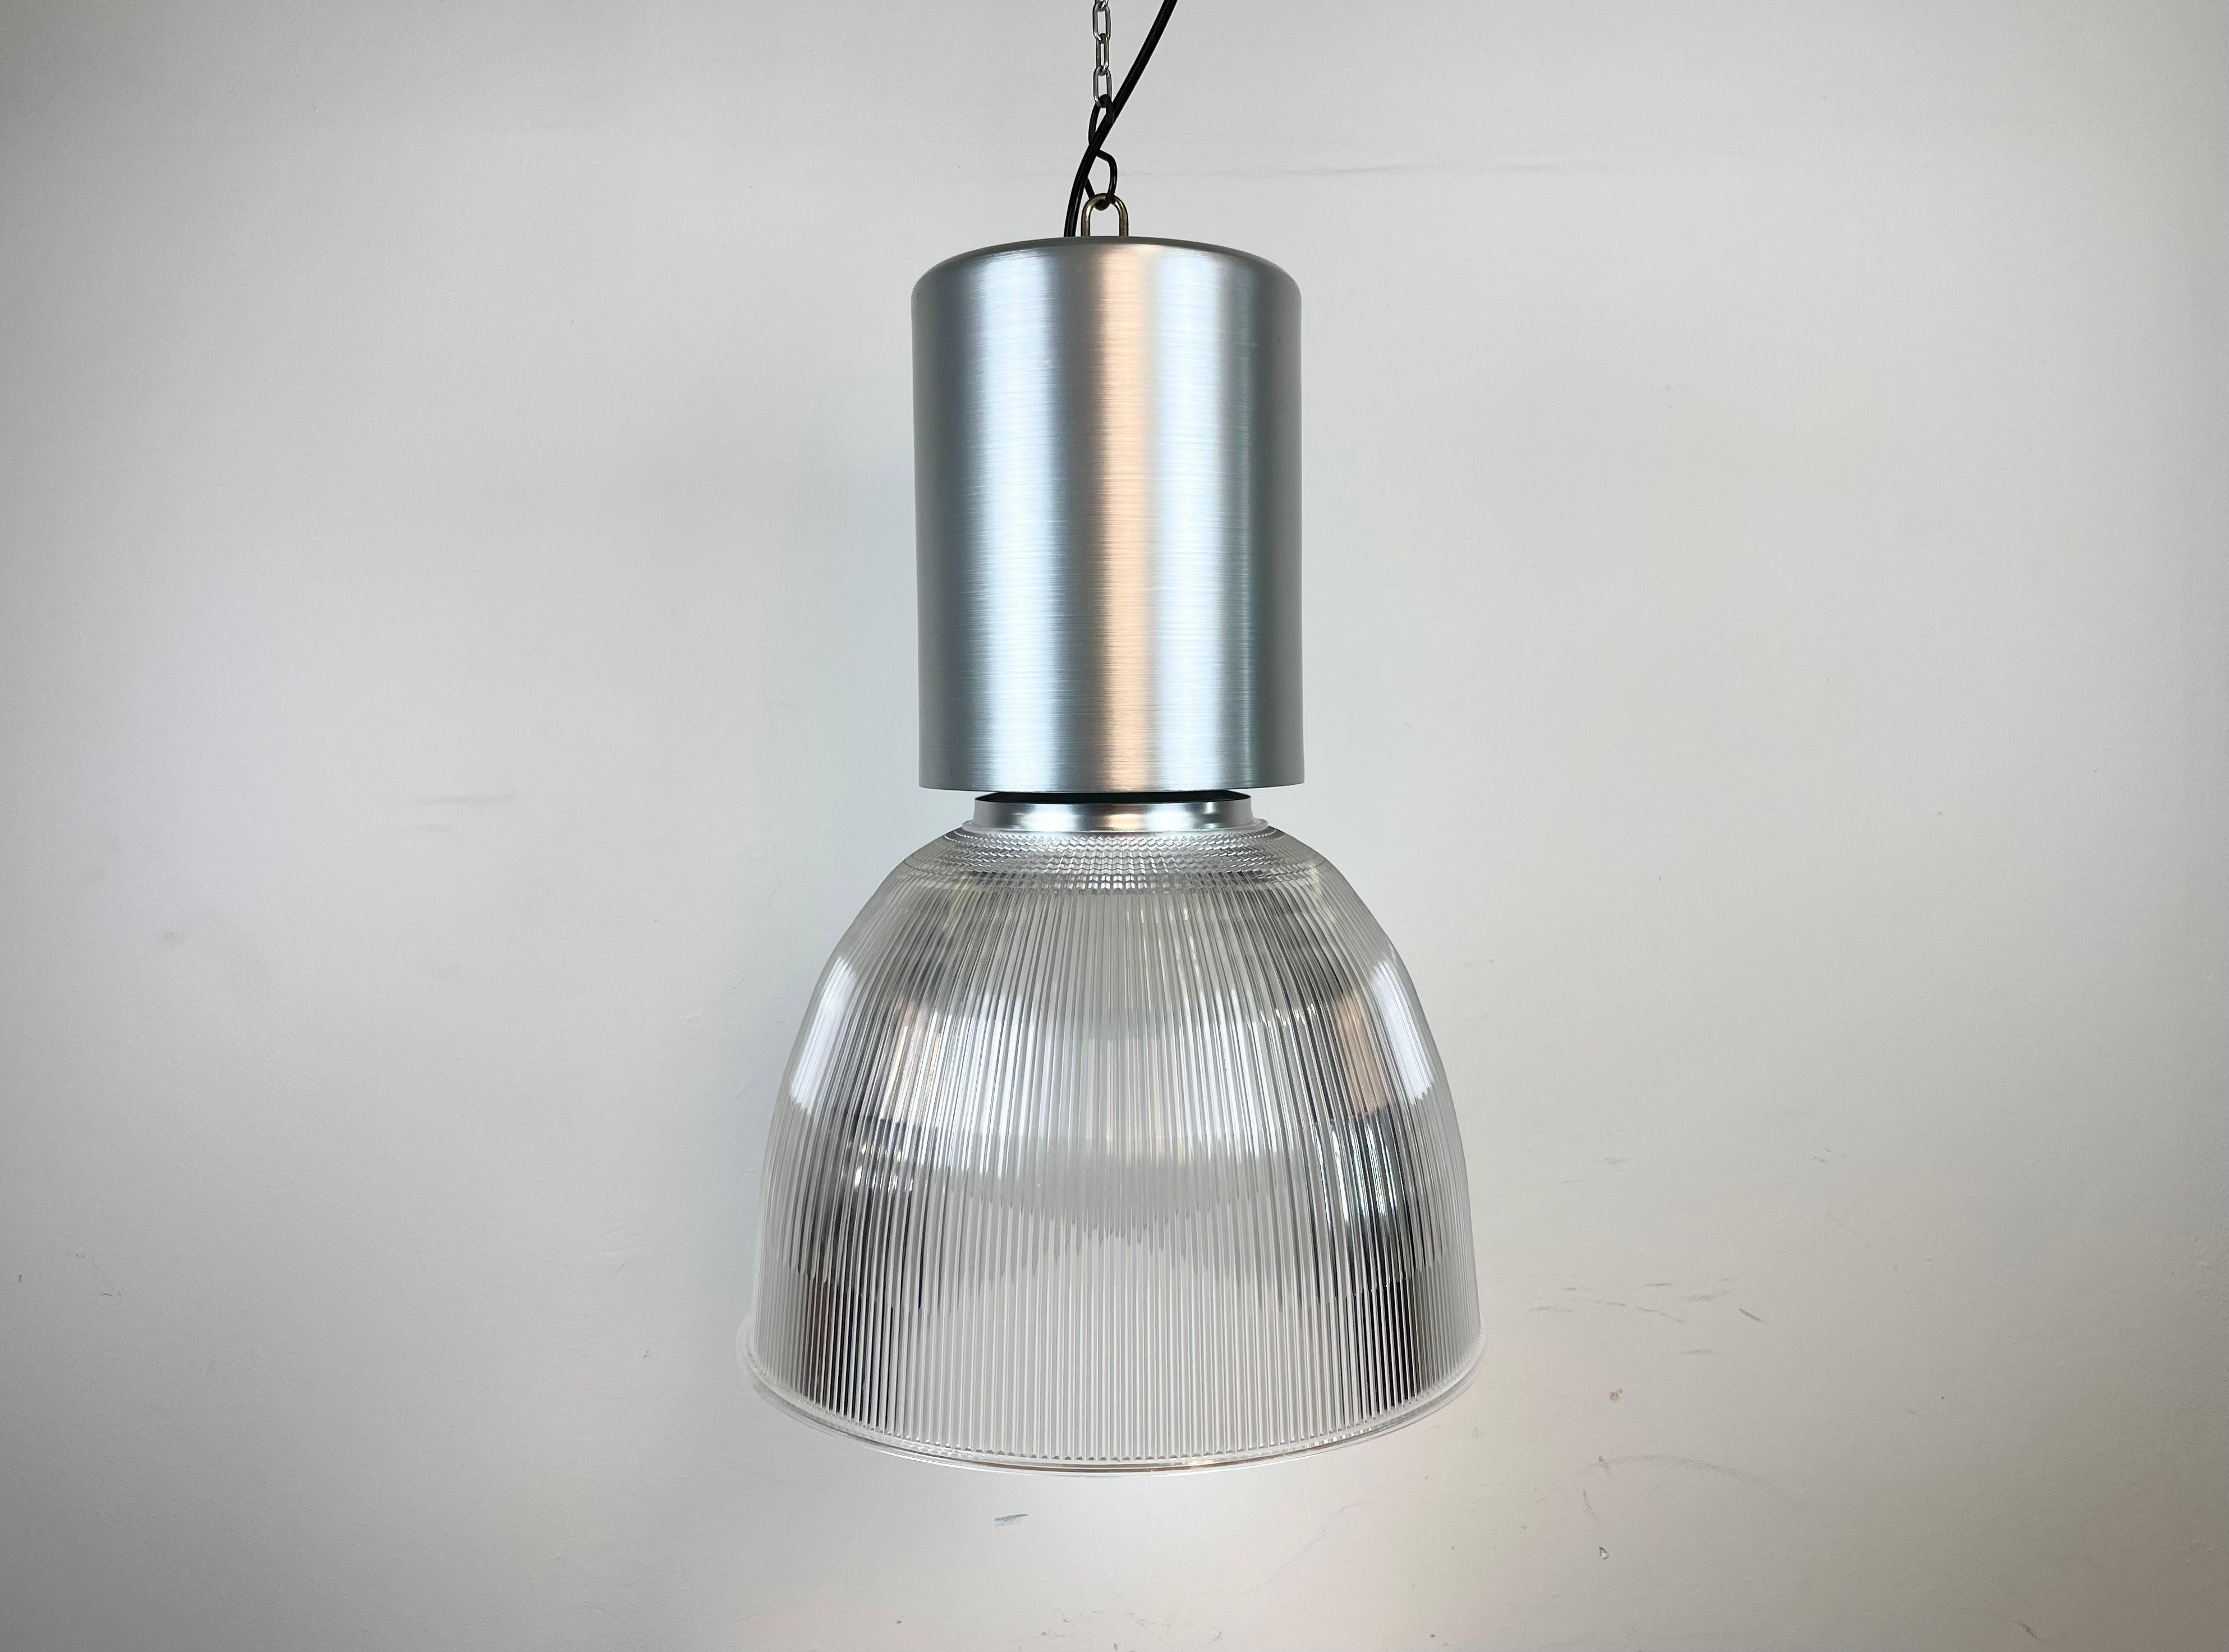 This industrial pendant lamp was made by Philips in Netherlands during the 1990s. It features an aluminum top and a transparent plastic shade. The socket requires E27 light bulbs. New wire. The diameter of the shade is 41 cm. It weighs 3 kg.